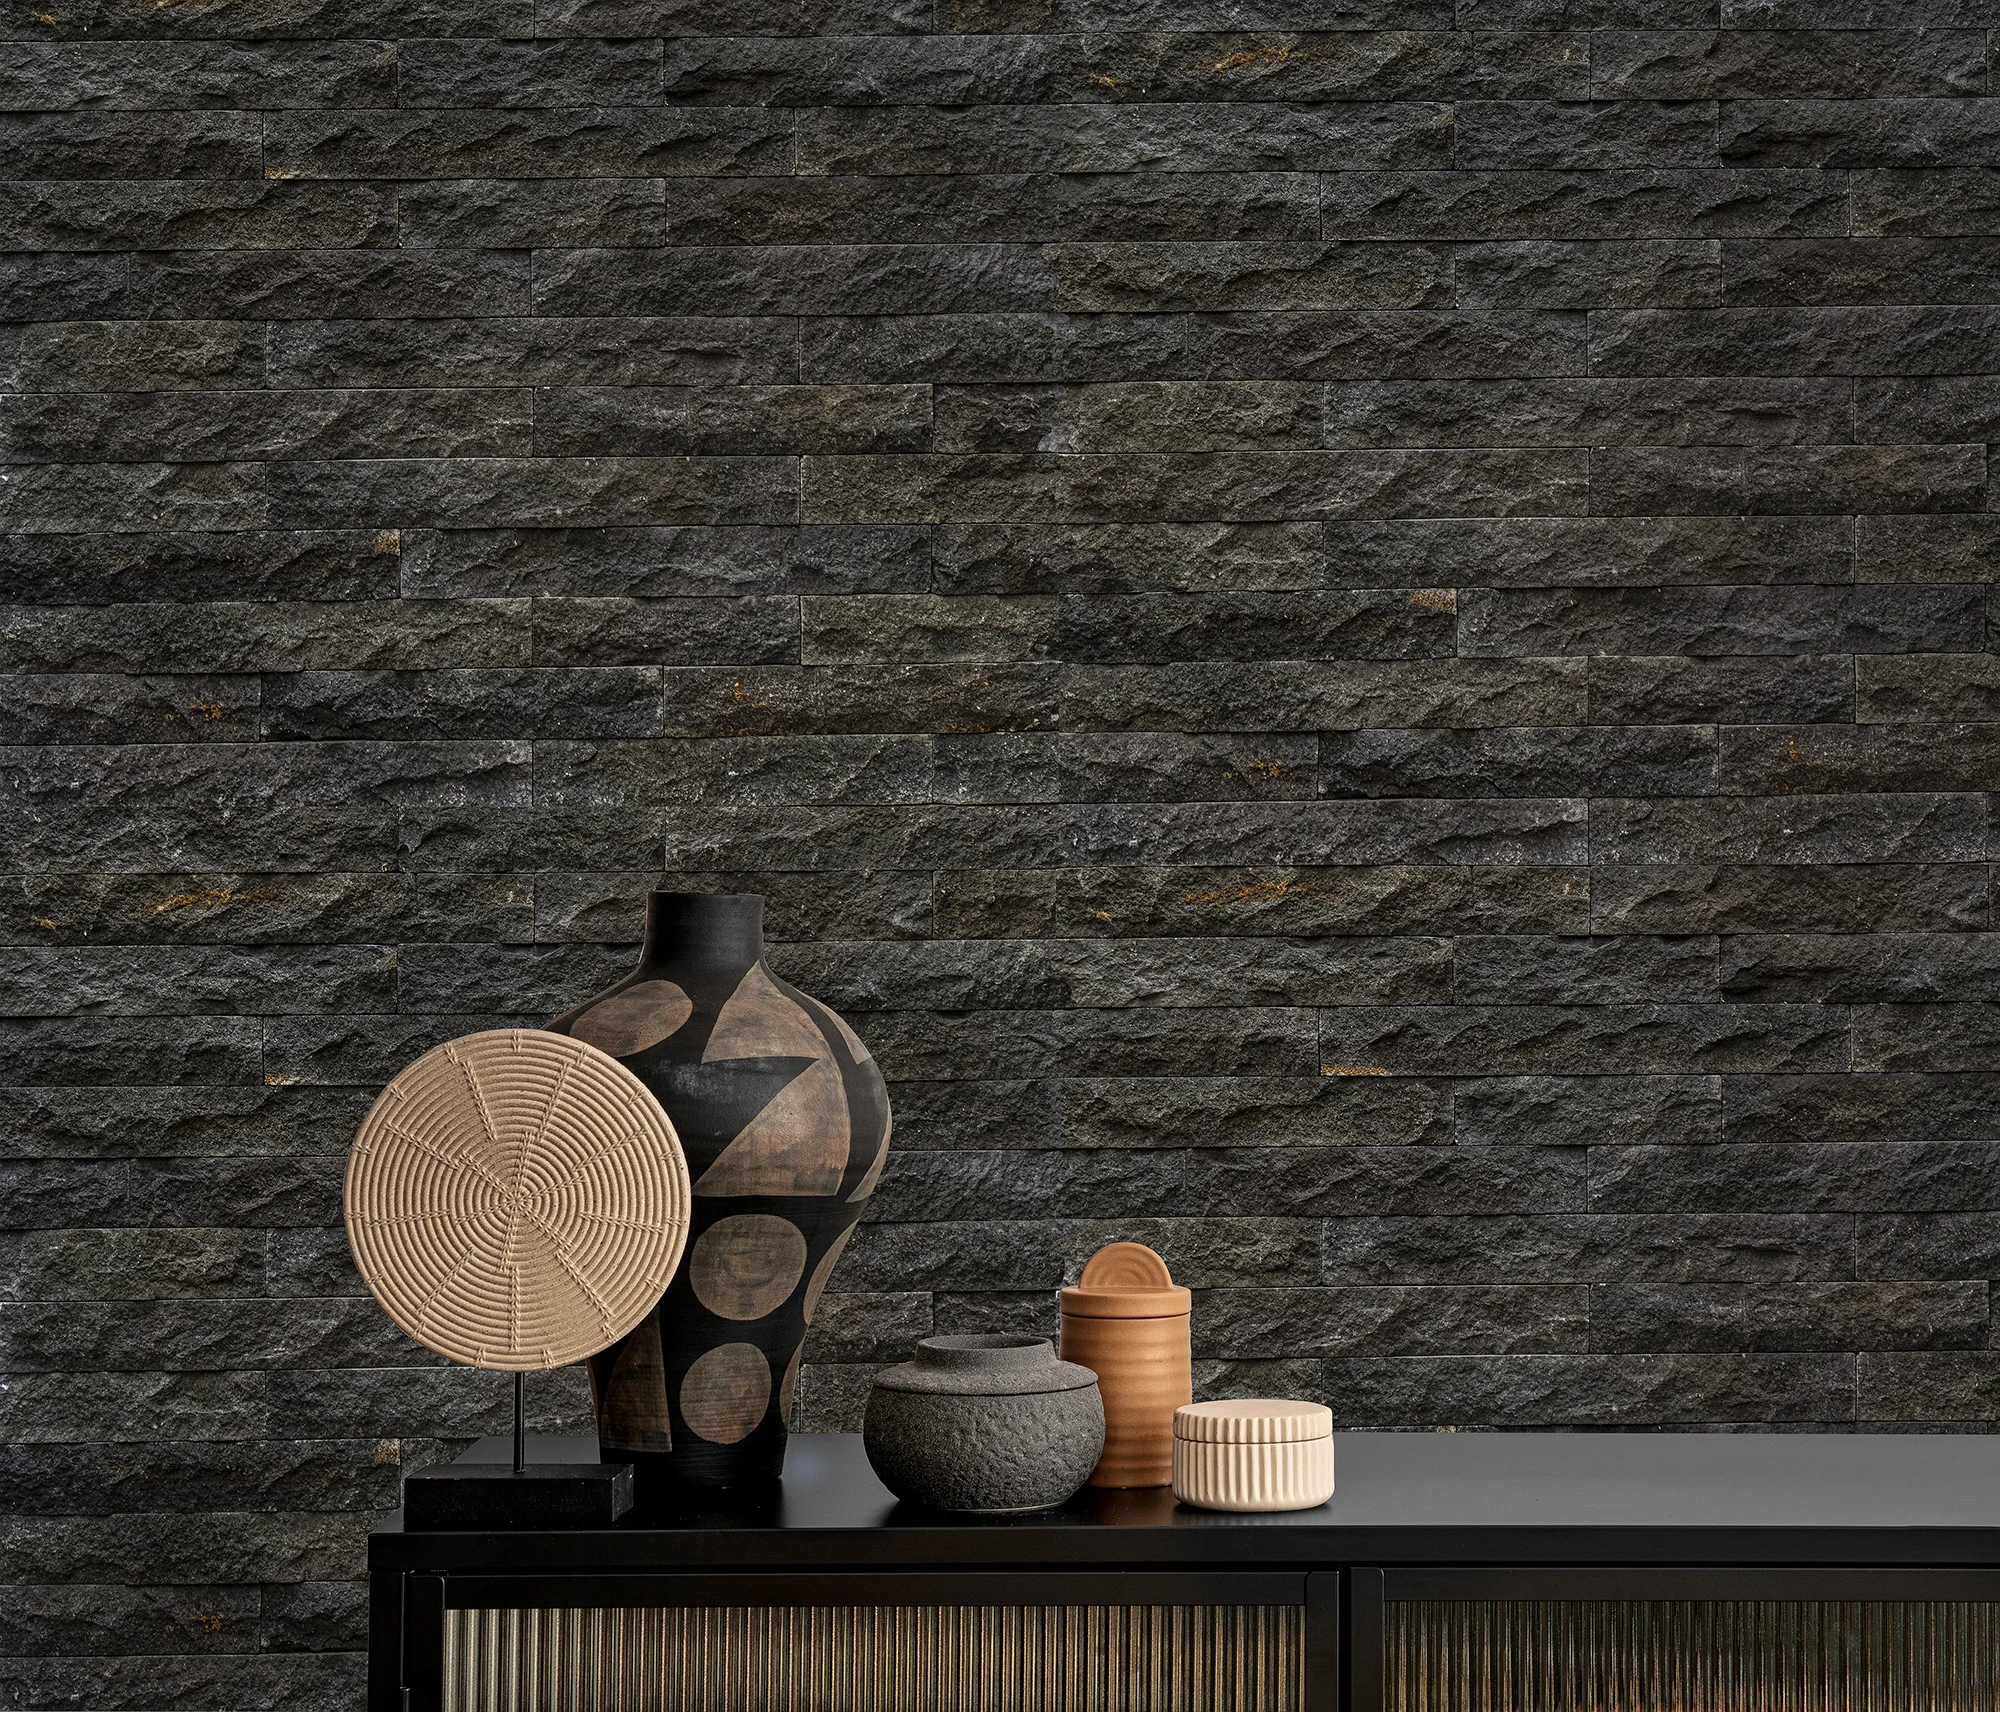 Anthracite color stone wall and some objects front of it